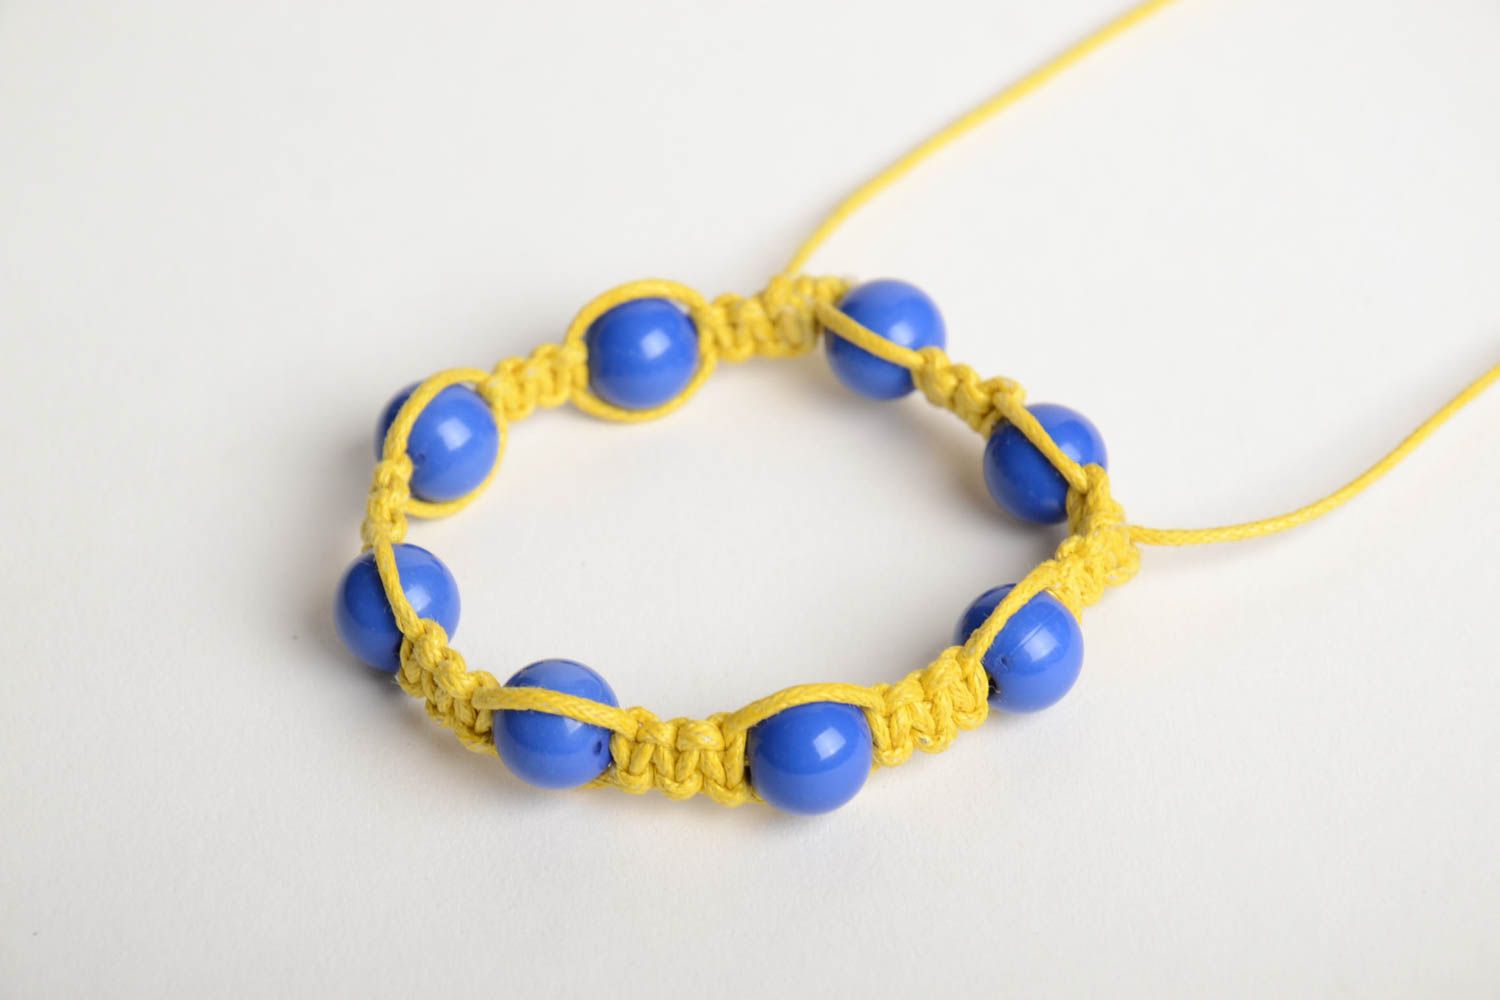 Handmade friendship bracelet woven of yellow cord and blue beads for children photo 4